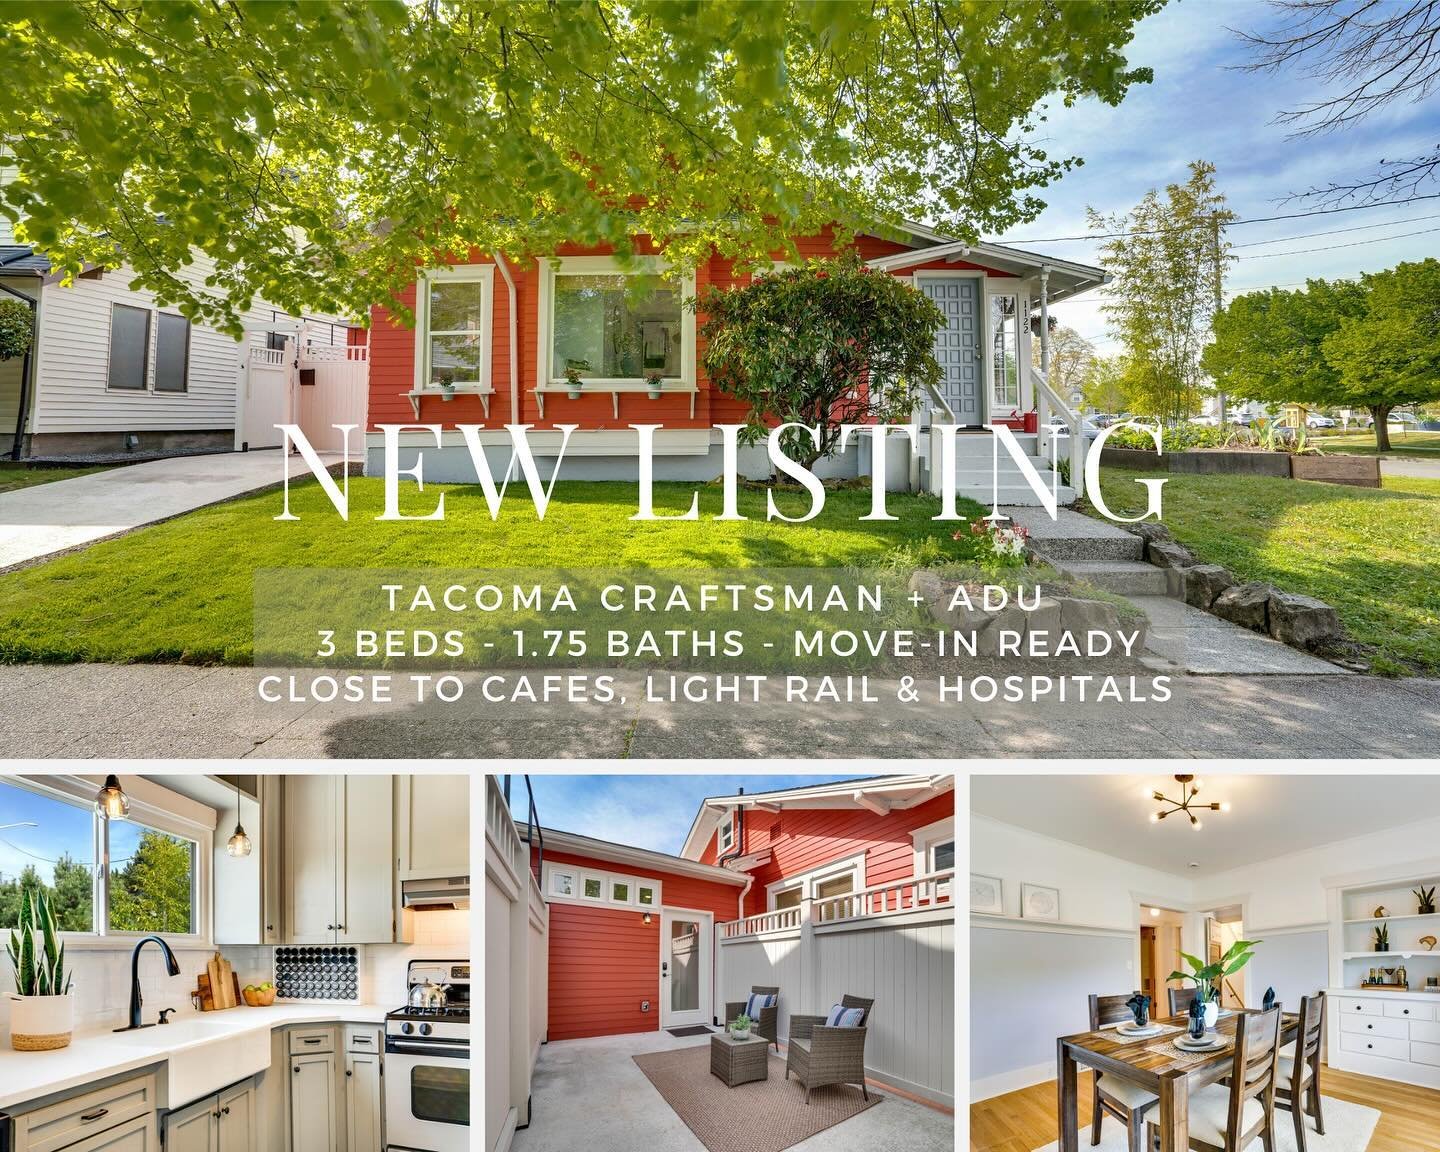 ✨ A move-in ready Craftsman with a rentable turnkey apartment attached beckons from a Tacoma street corner. You&rsquo;ll know you&rsquo;re in the right place when you see cheerful red walls in the dappled shade of leafy street trees, flowering basket